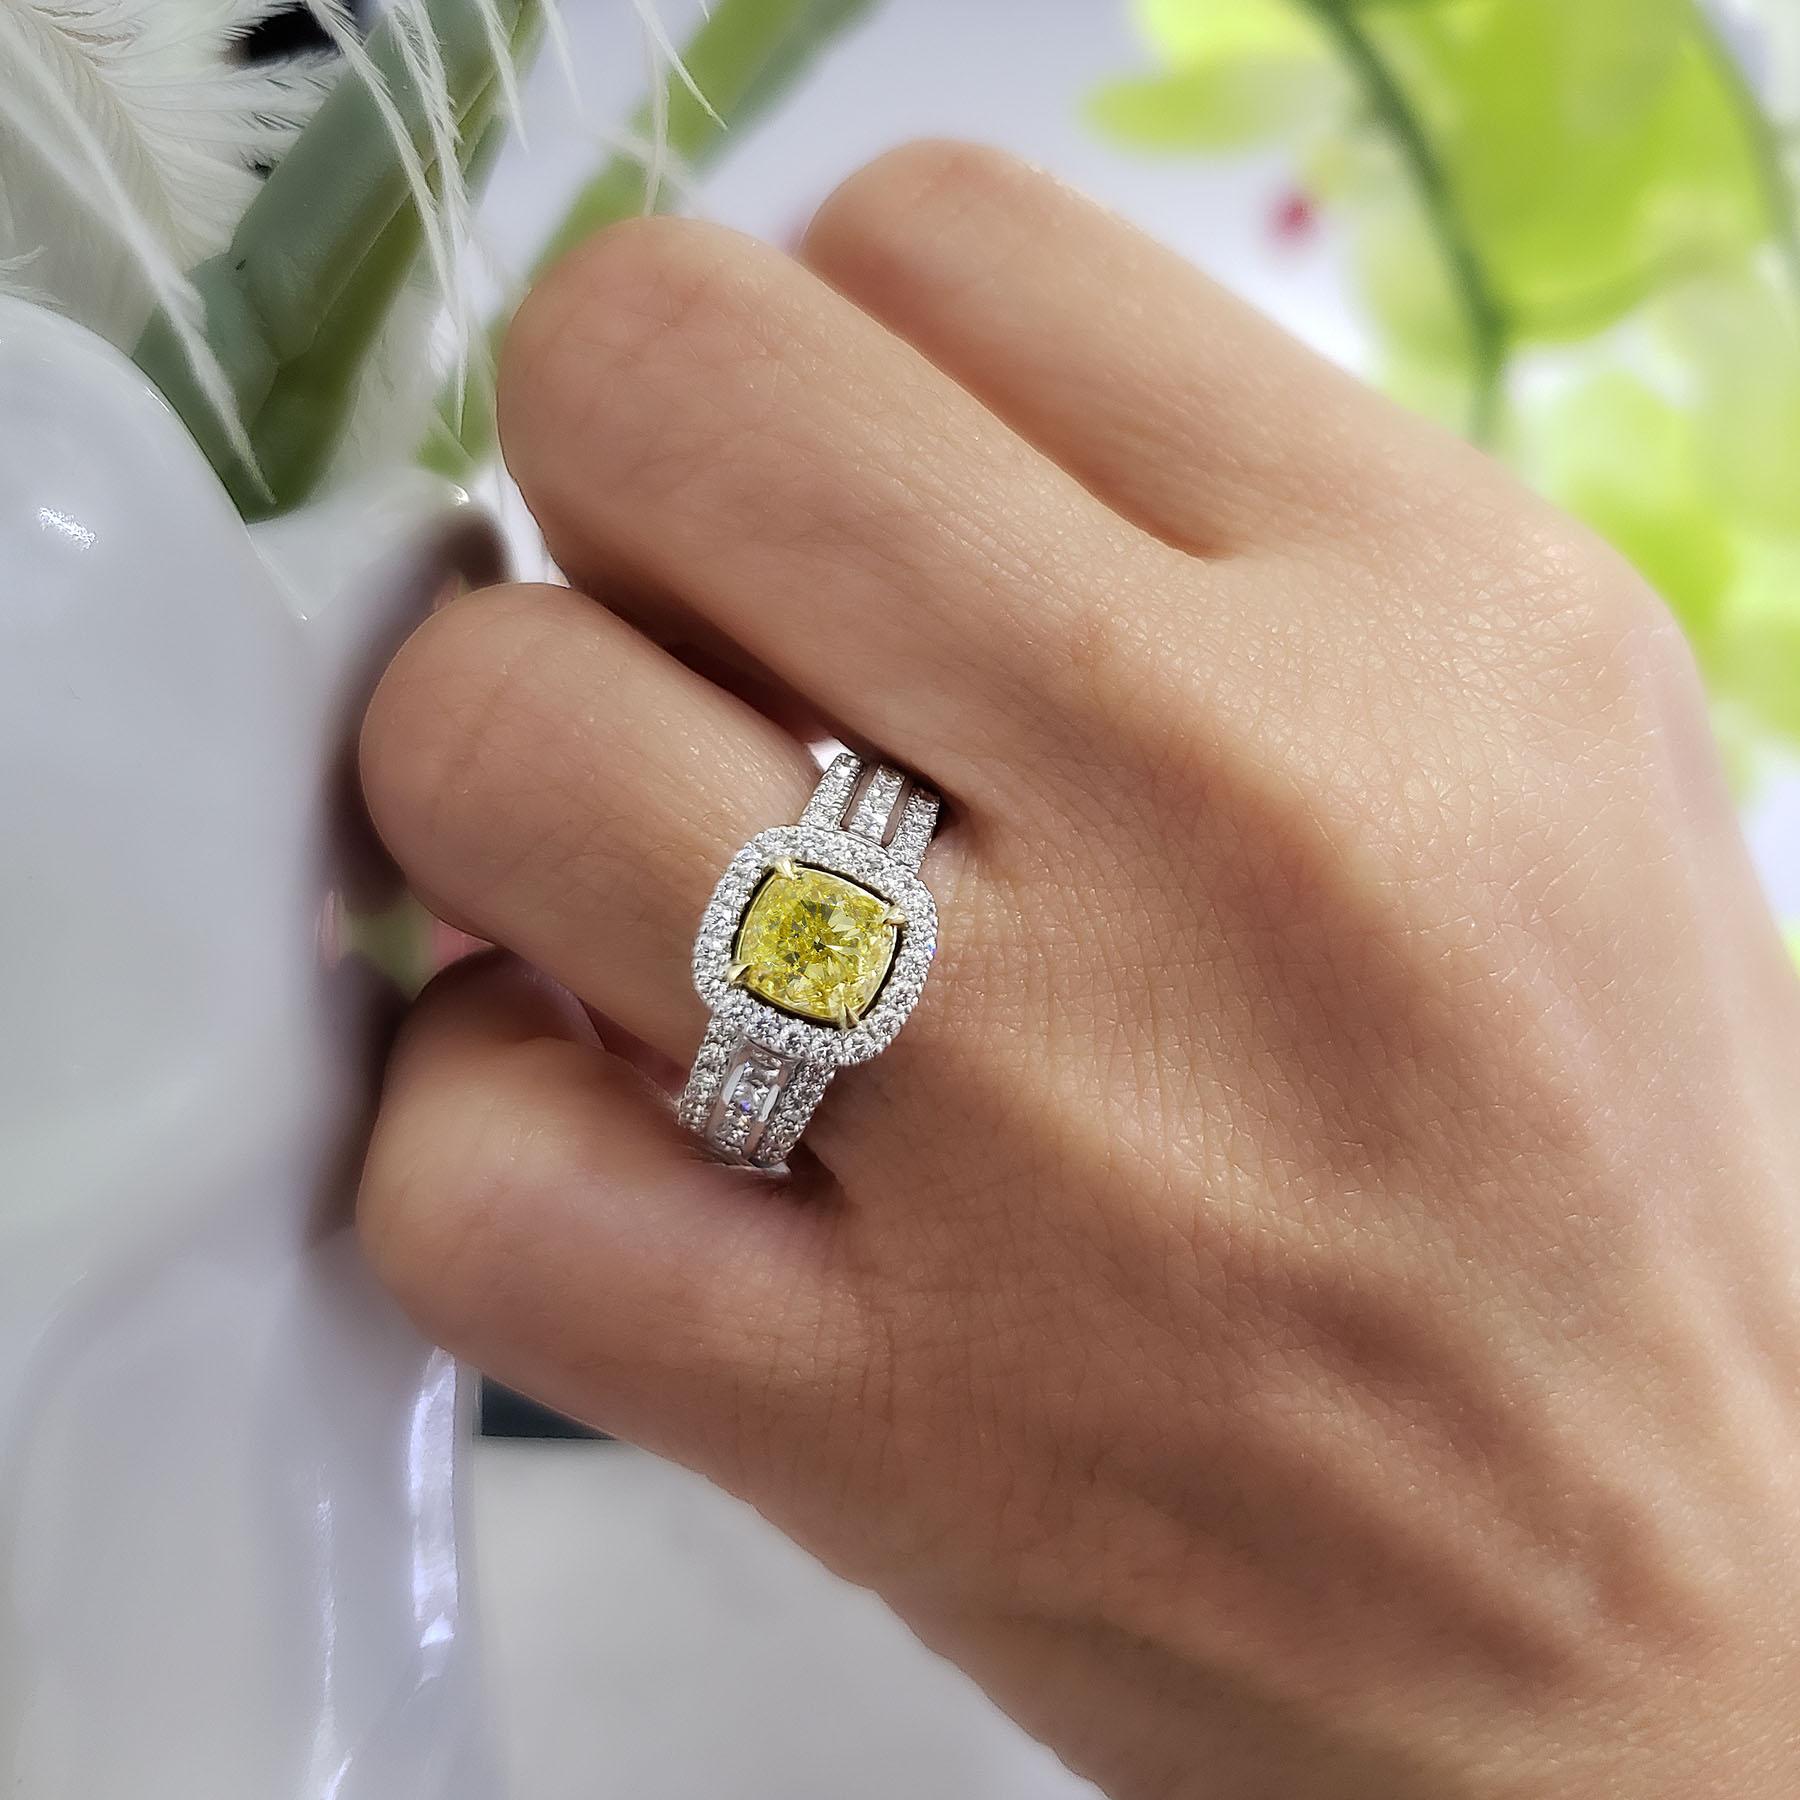 What a wonderful ring made only by King of Jewelry. It features a 0.80 Ct. Fancy Yellow Cushion cut diamond as its center stone with a clarity of VS2. Round Cut Diamonds are Pave set flowing down the shank and princess cut diamonds set as channel